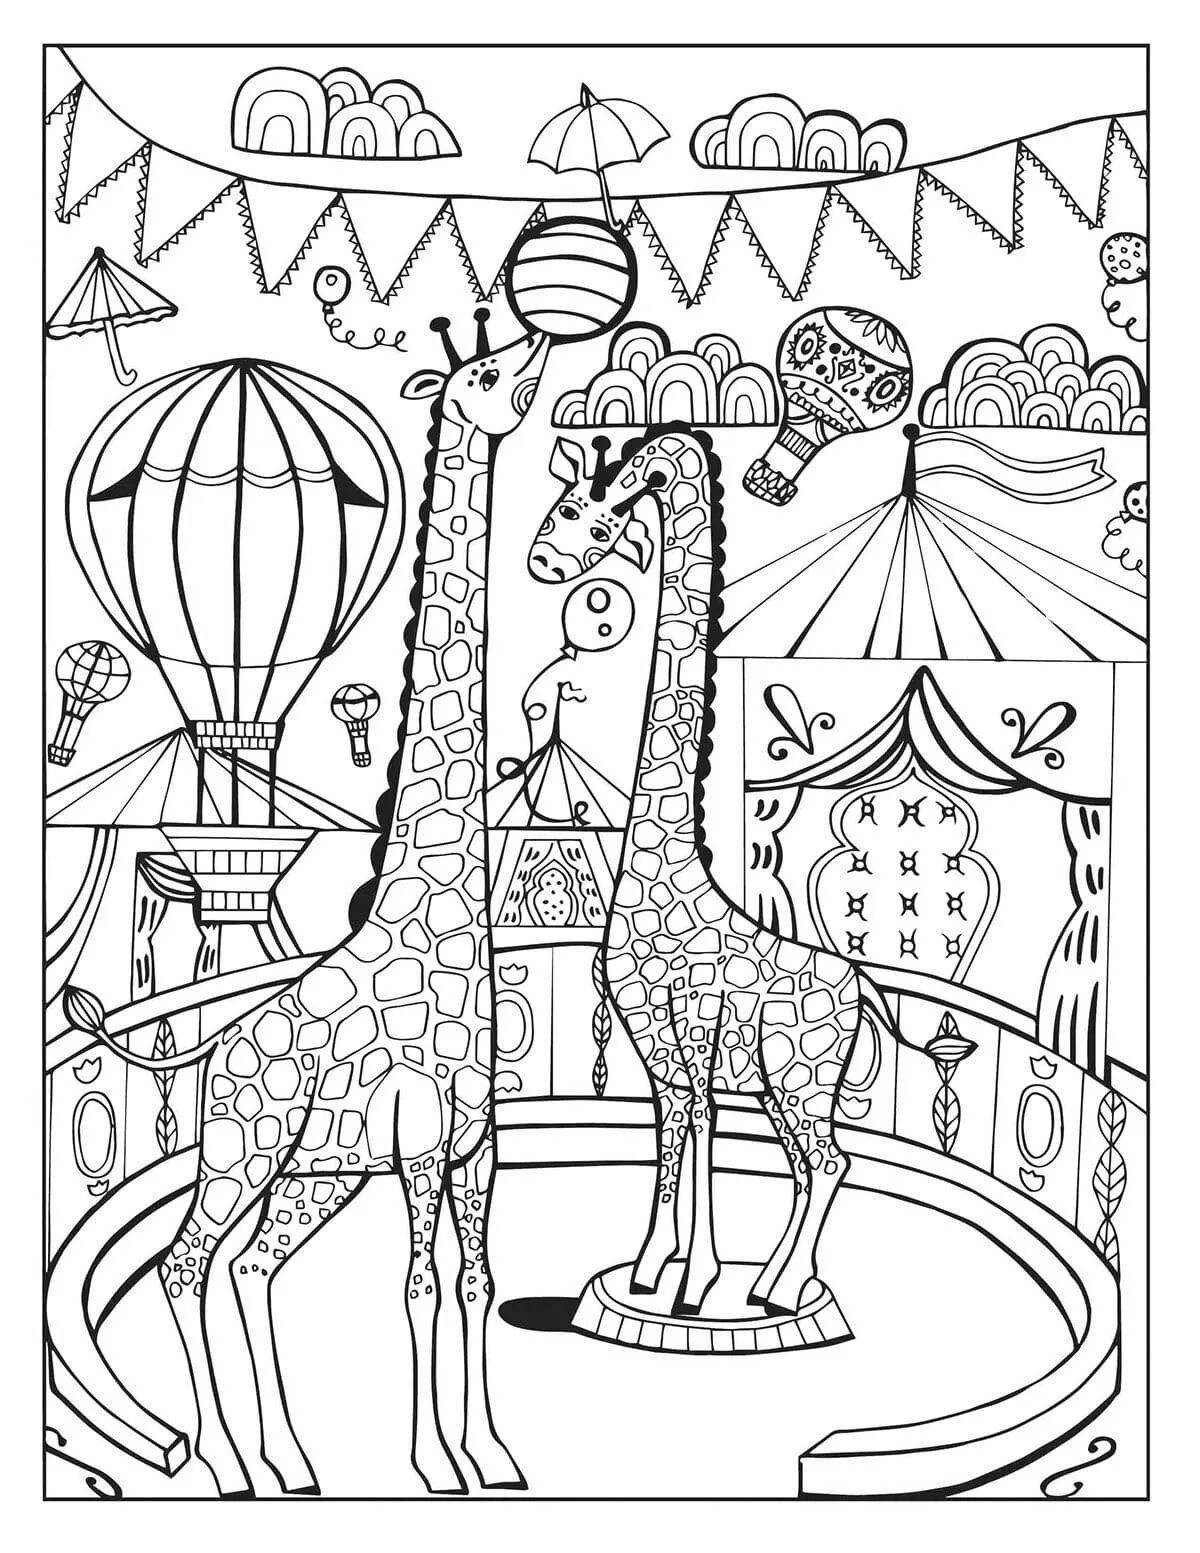 Coloring page magical circus arena